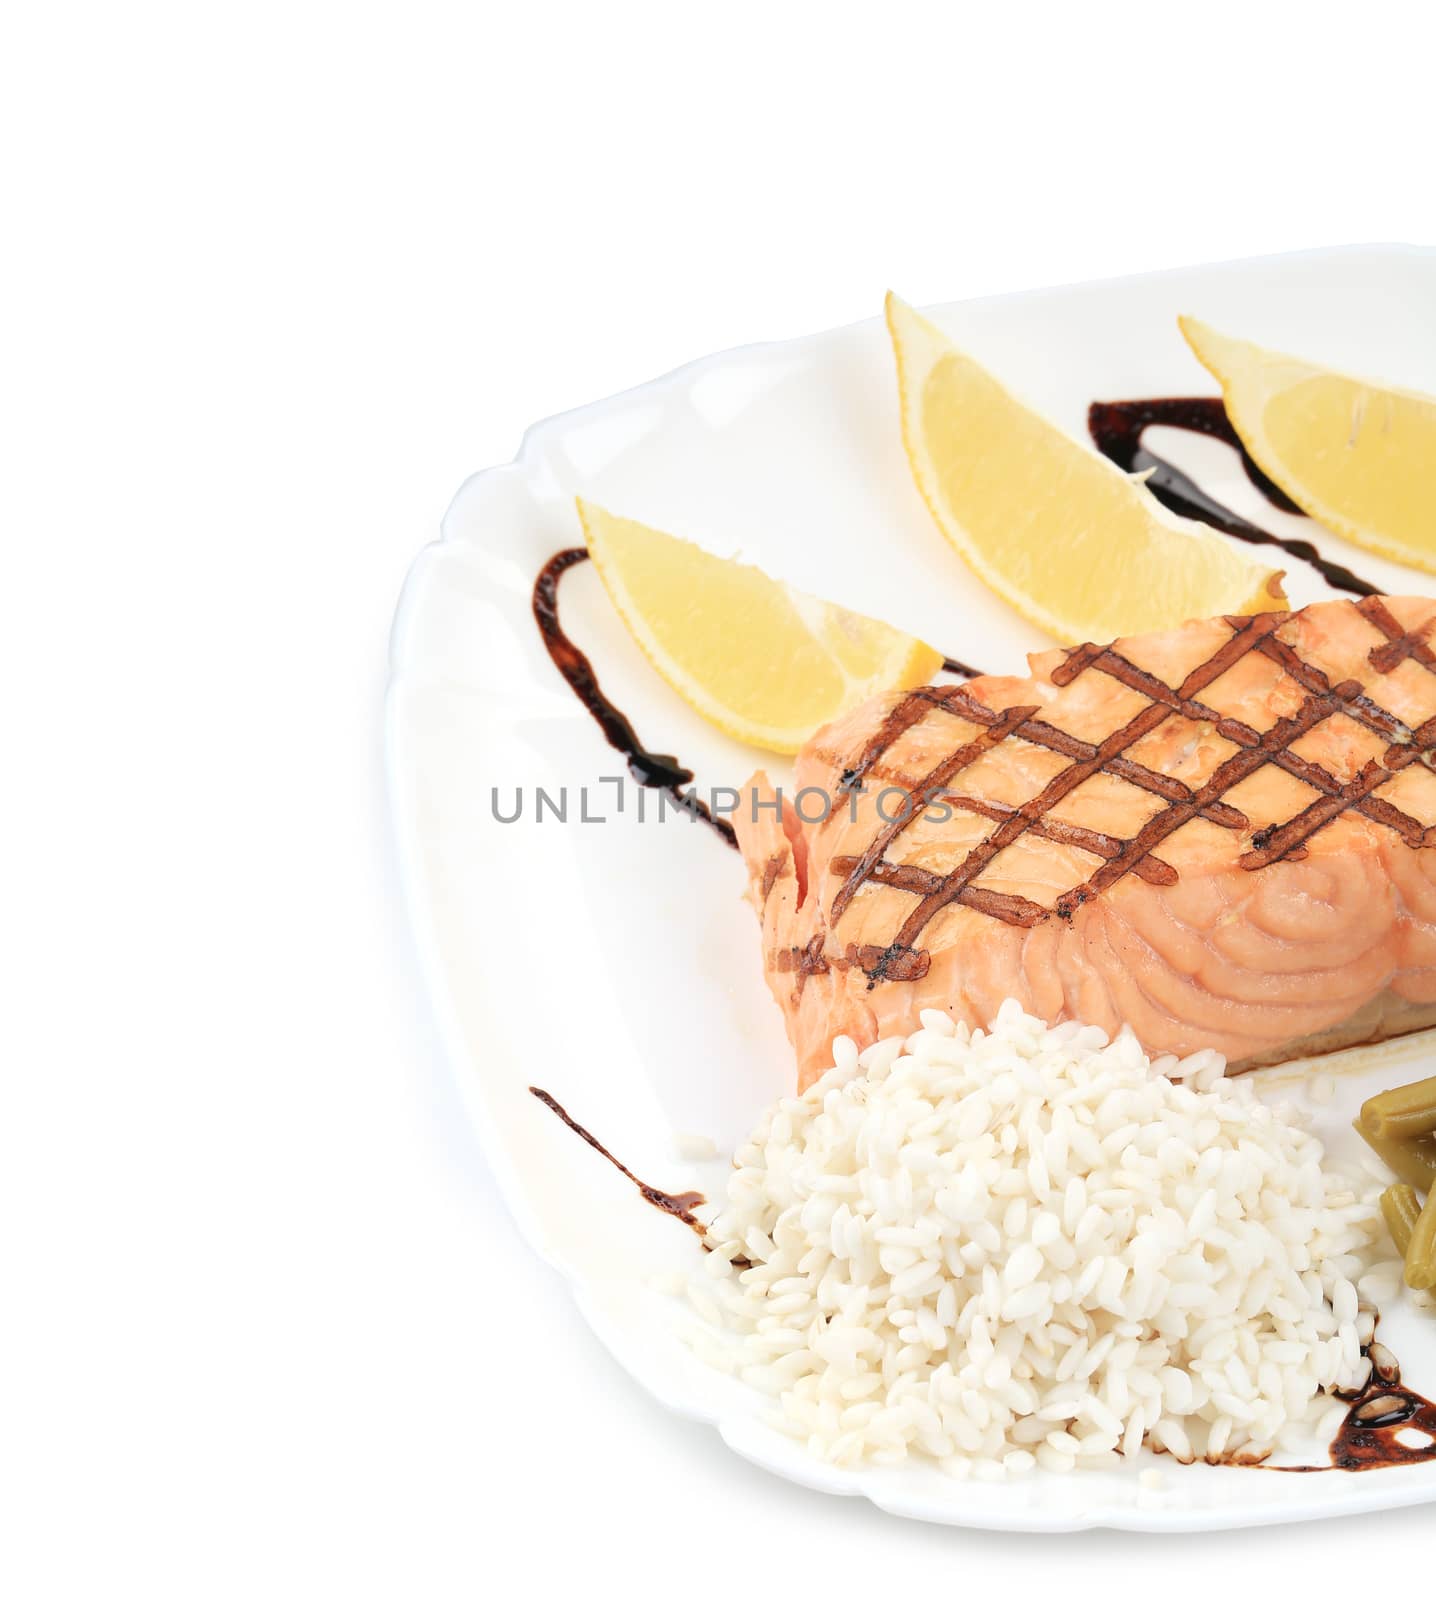 Lemon slices and salmon fillet. Whole background.